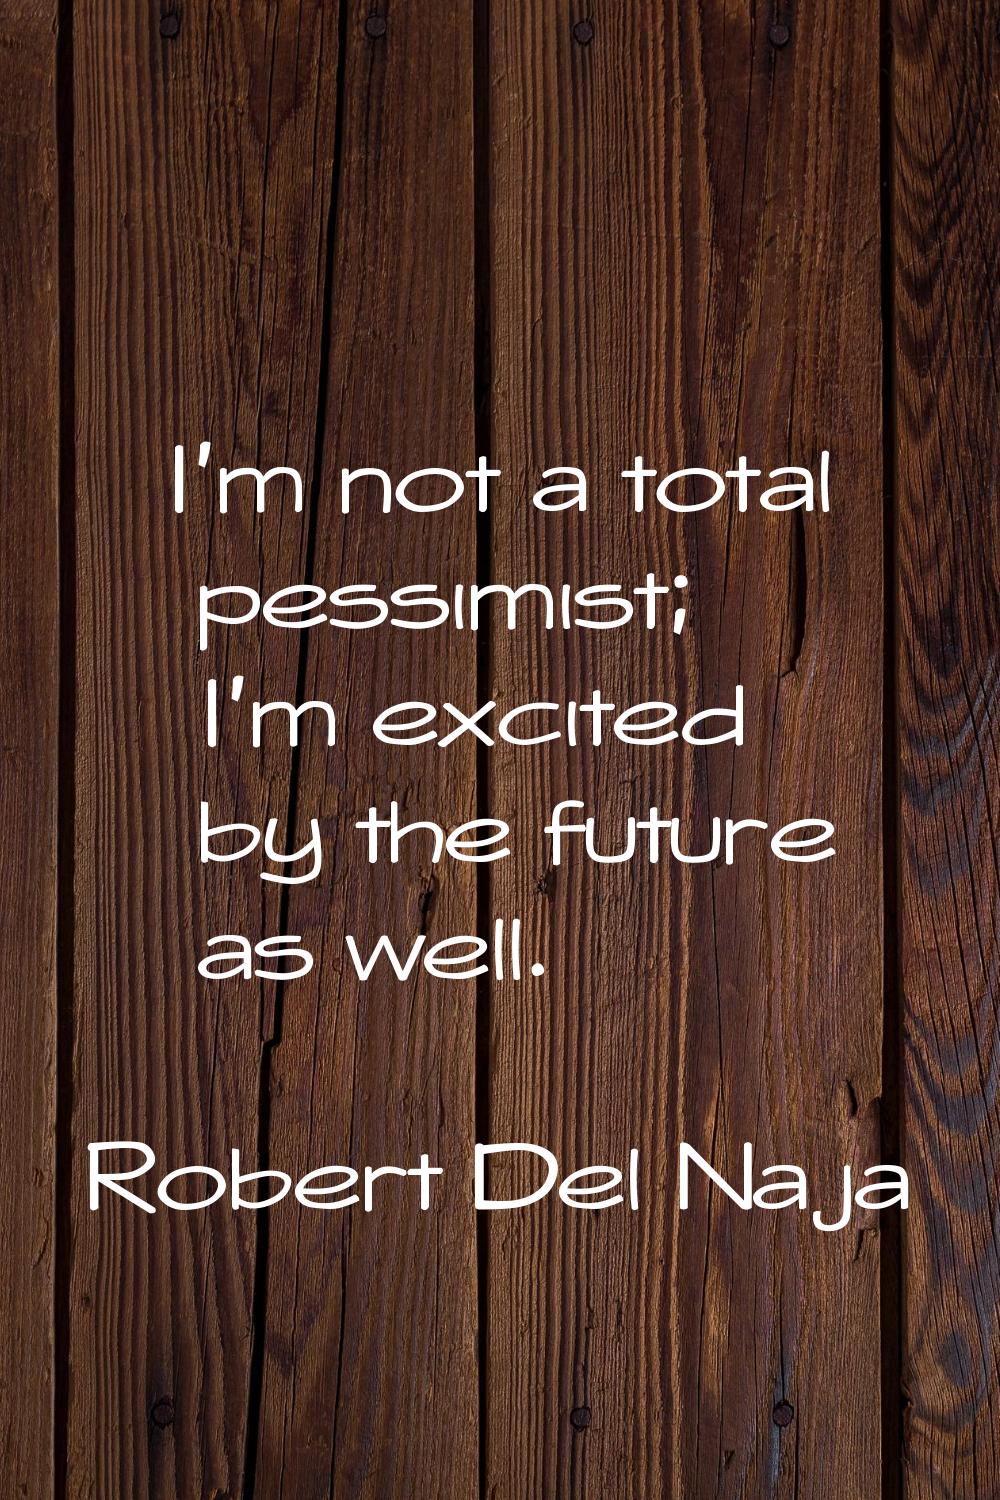 I’m not a total pessimist; I’m excited by the future as well.